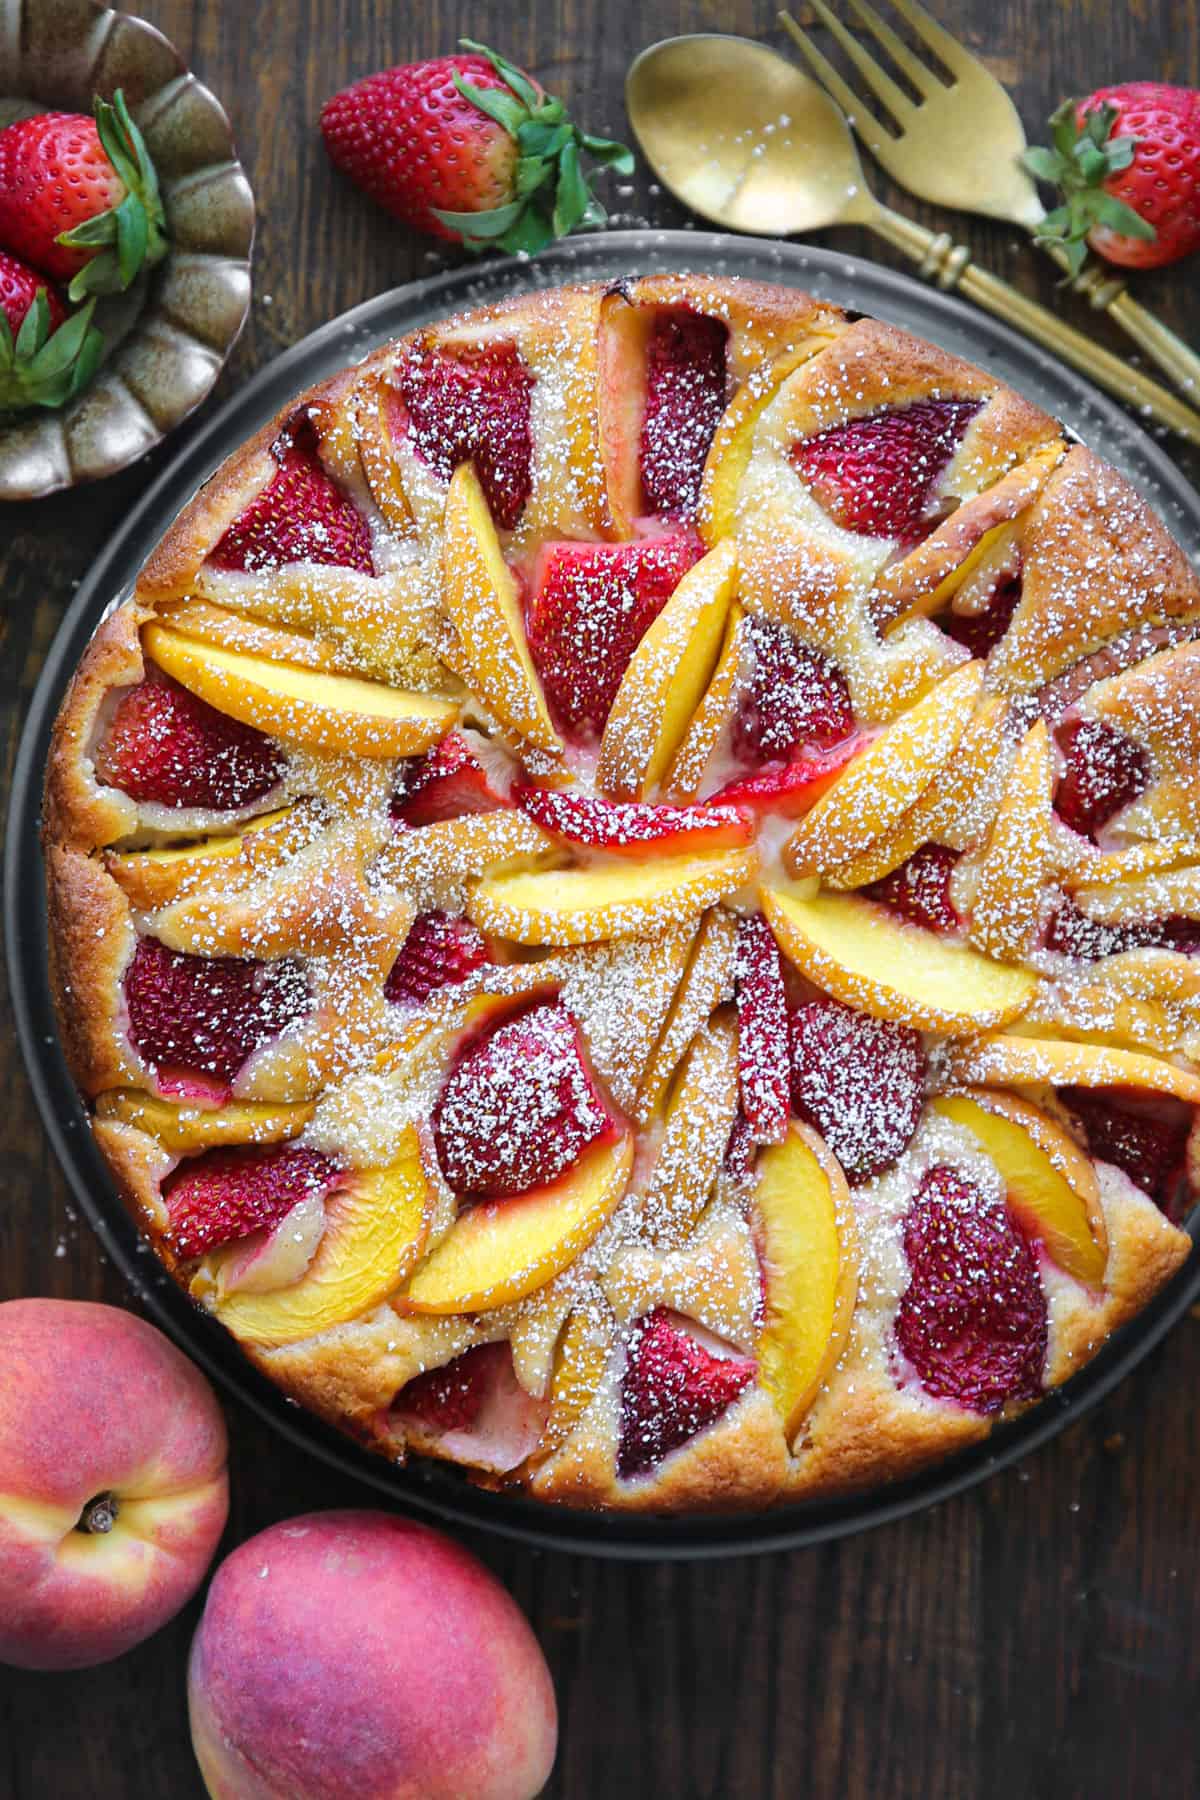 Strawberry Peach Cake (dusted with powdered sugar).